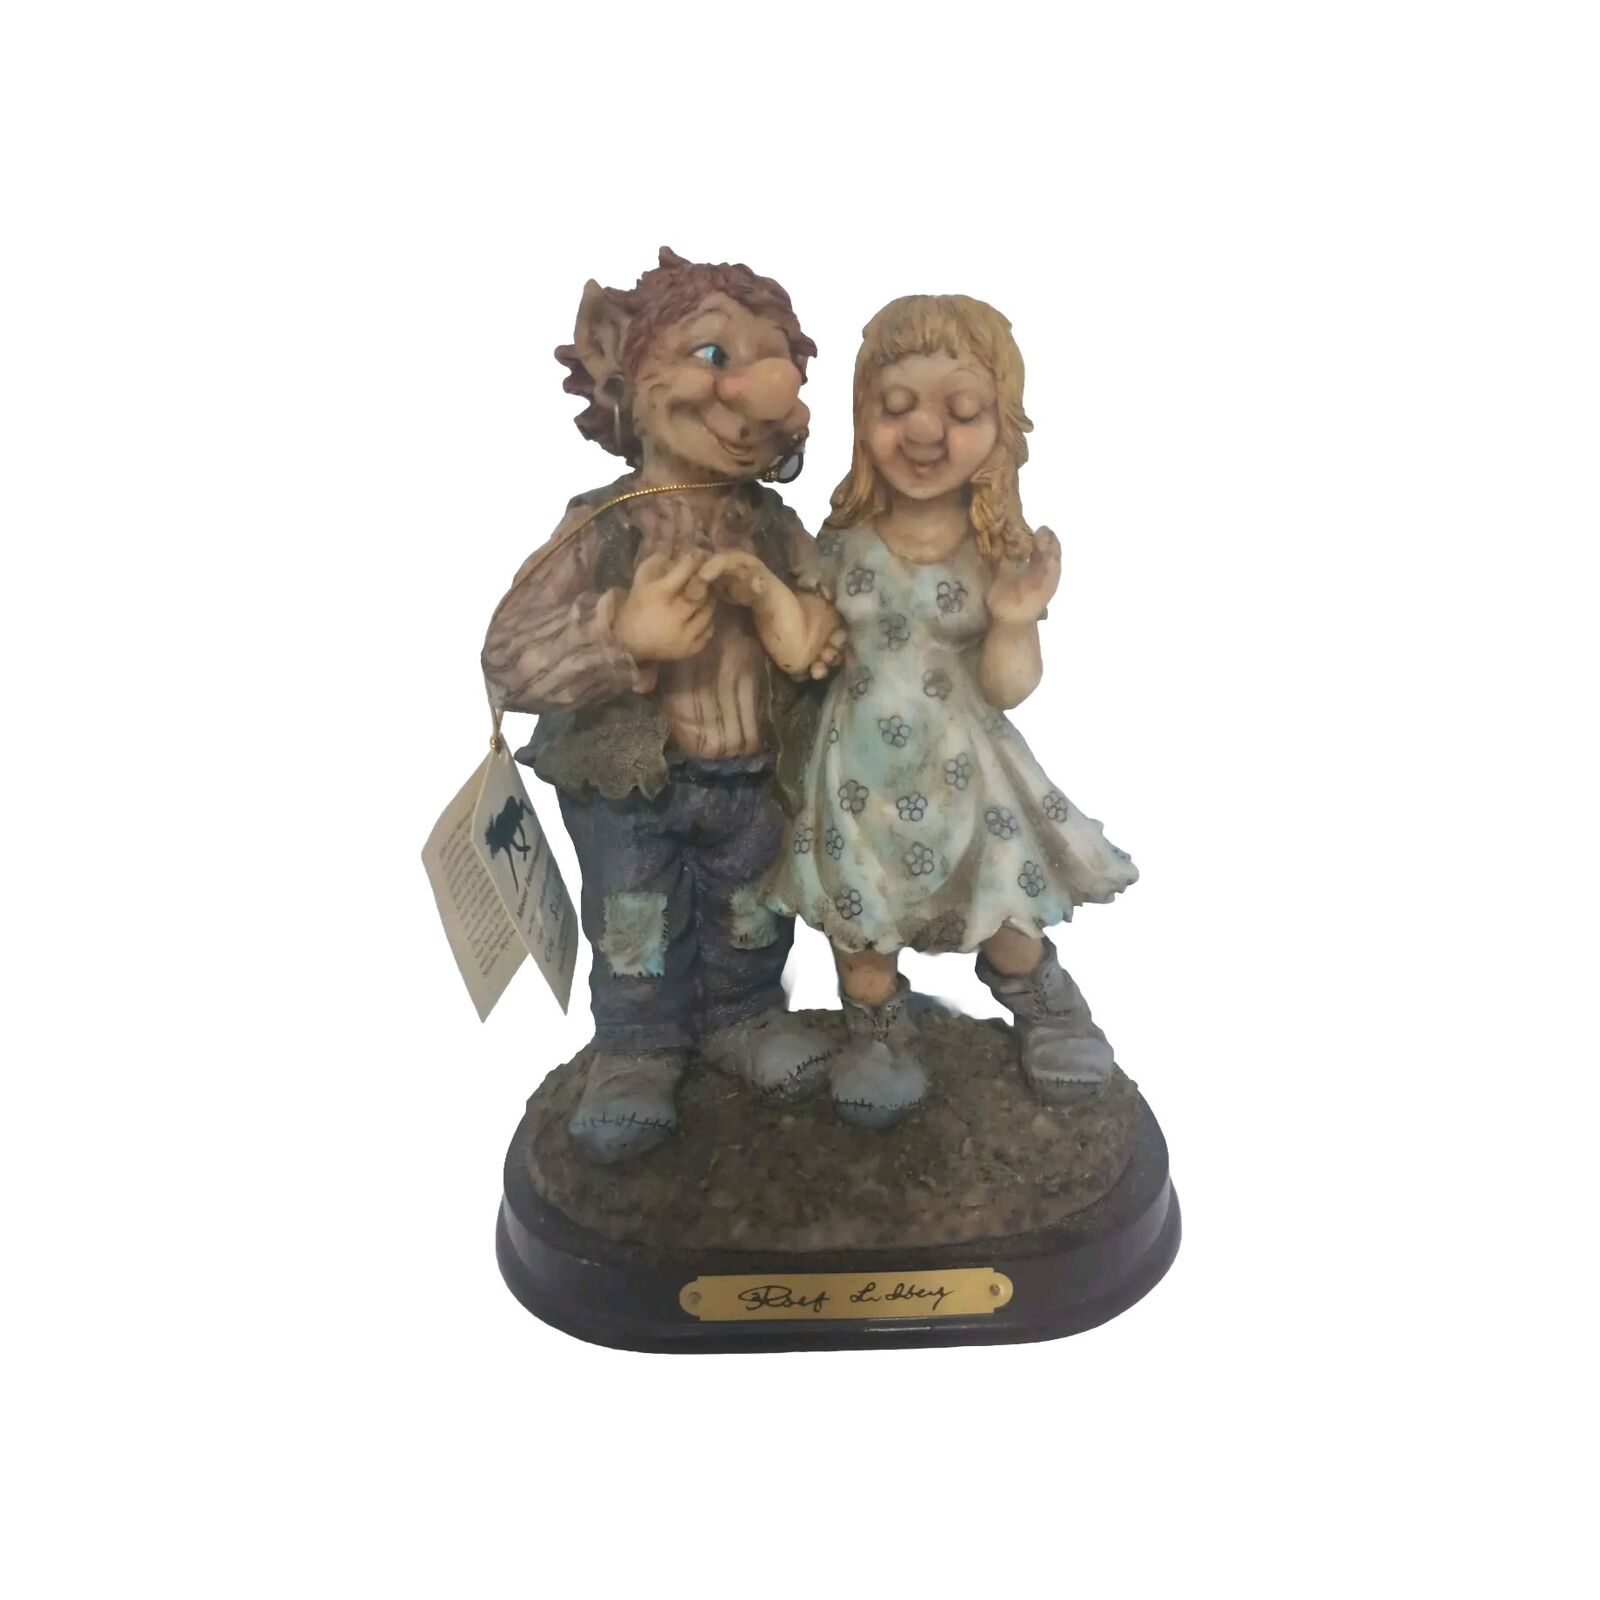 Vintage Engaged Troll Couple from the works of Rolf Lidberg Troll Figure